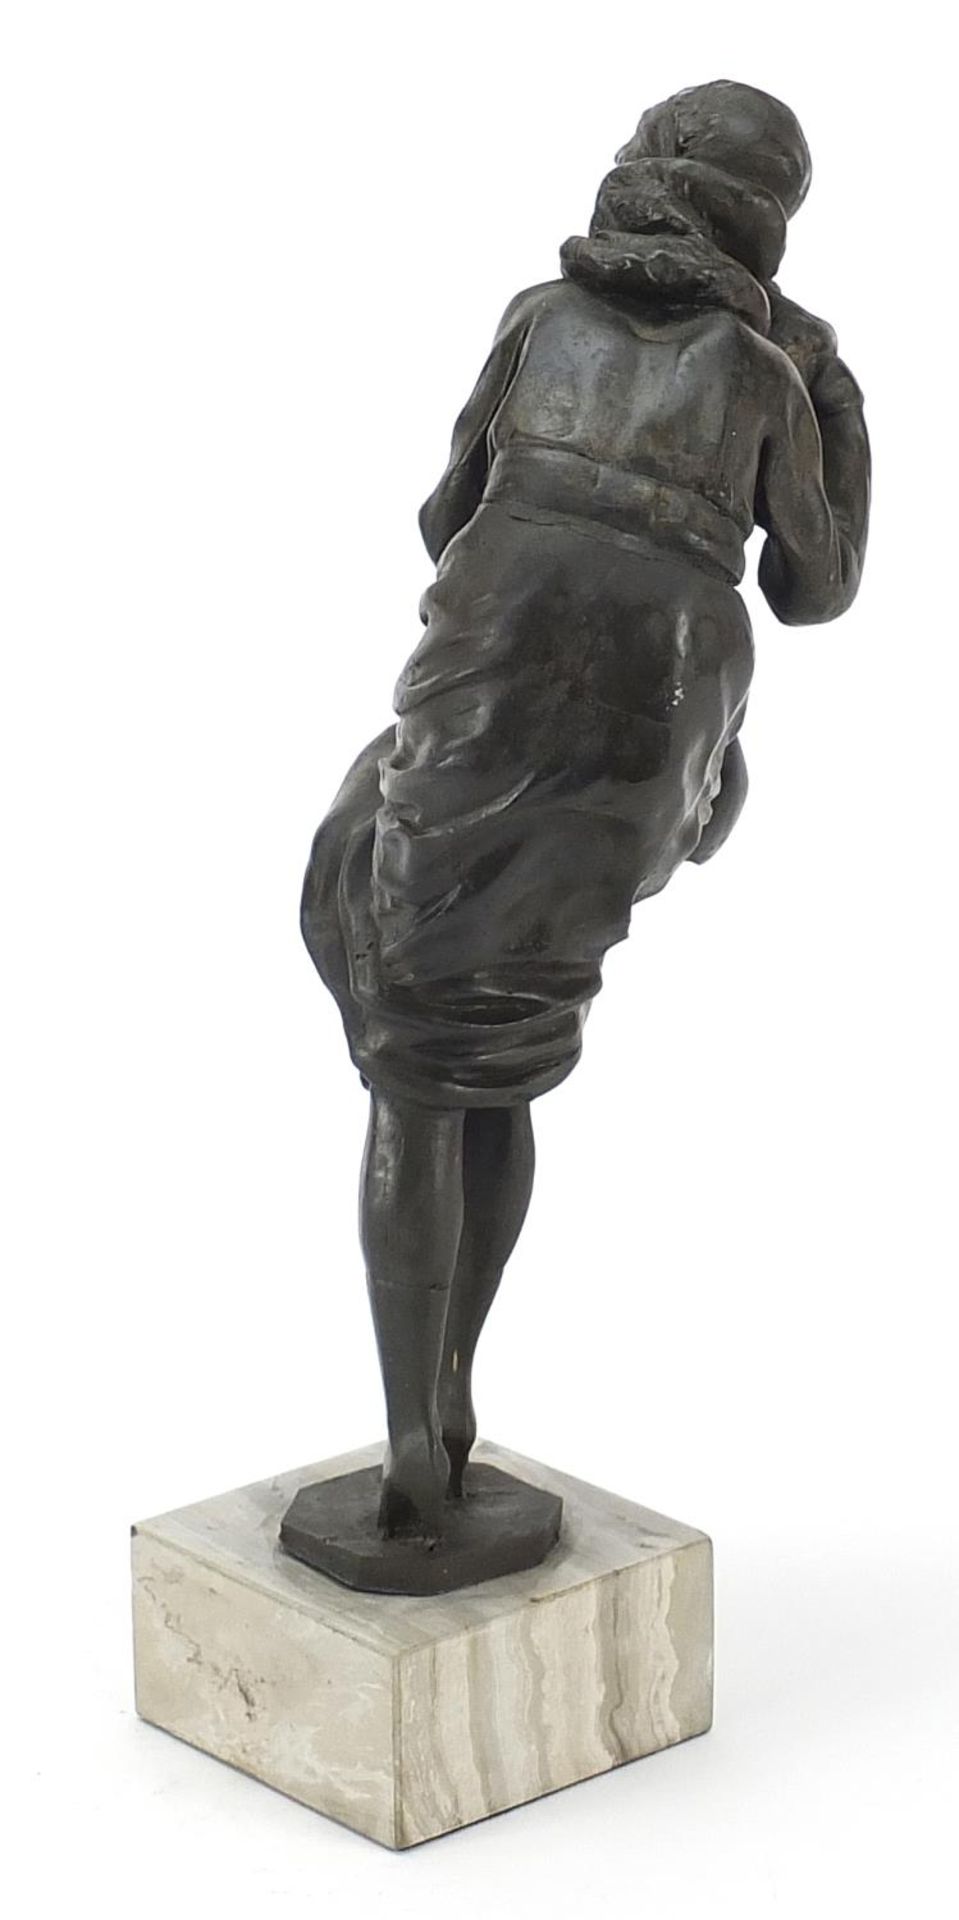 Art Deco design bronzed figurine raised on a simulated marble base, 31cm high - Image 2 of 3